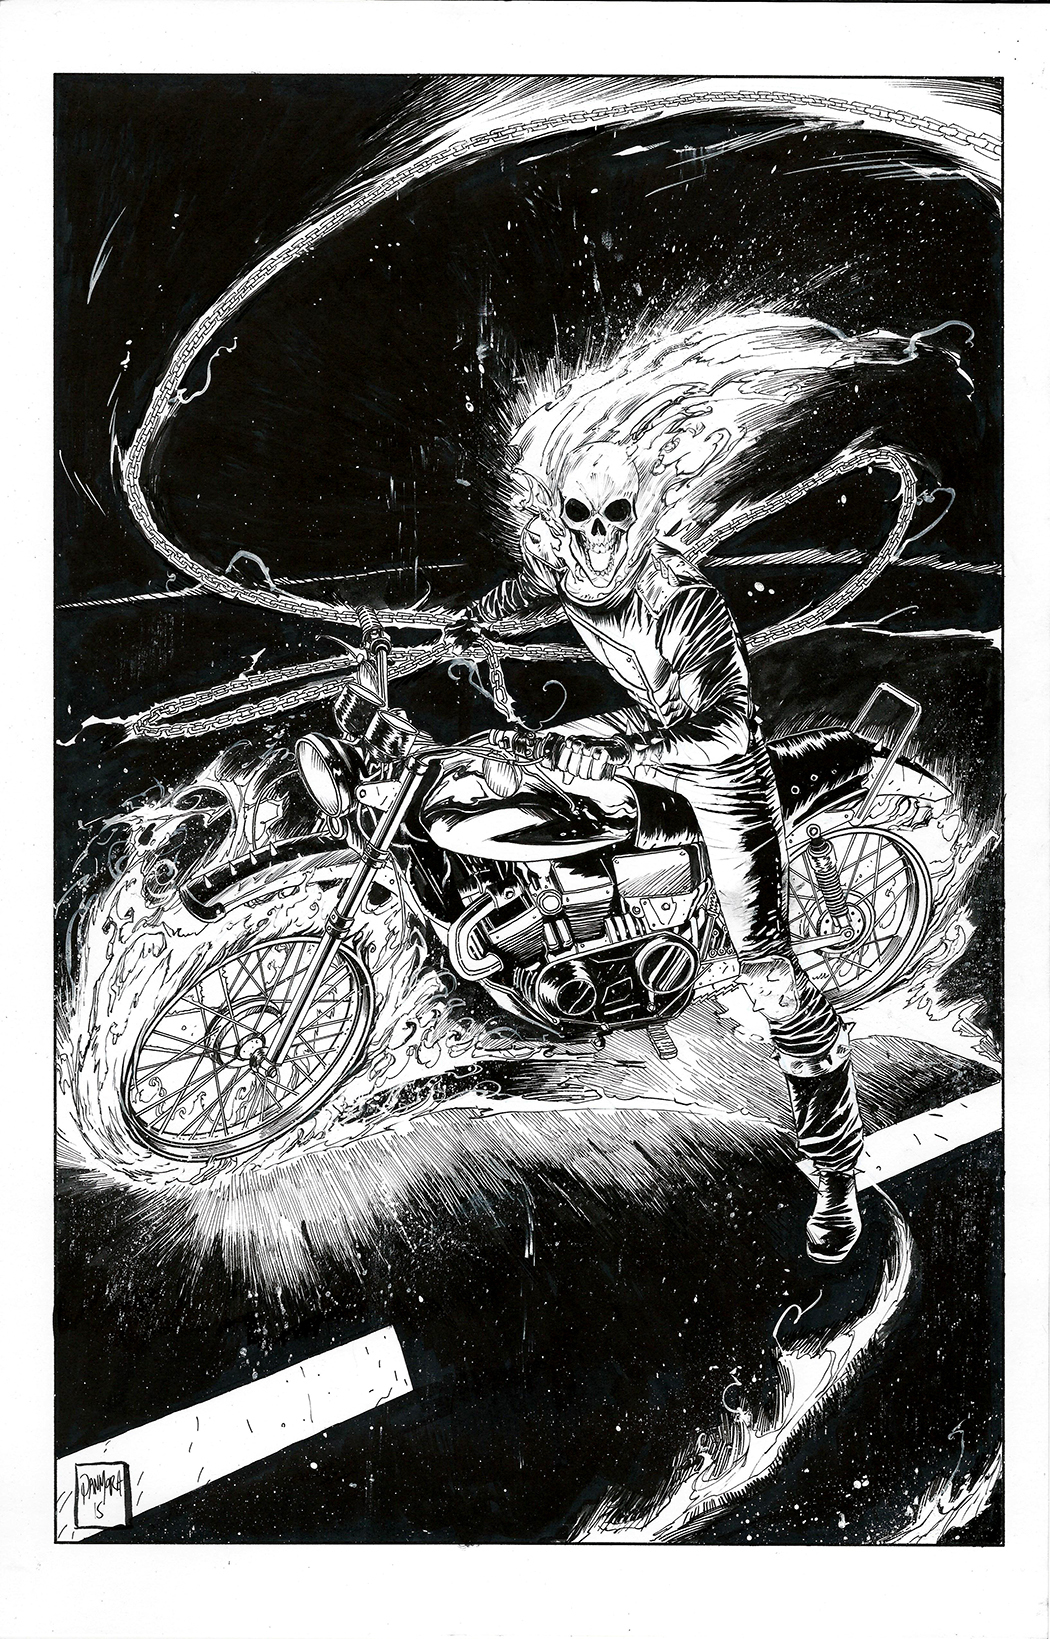 comic commissions sketch ghost rider spiderman Rogue Xmen wolverine